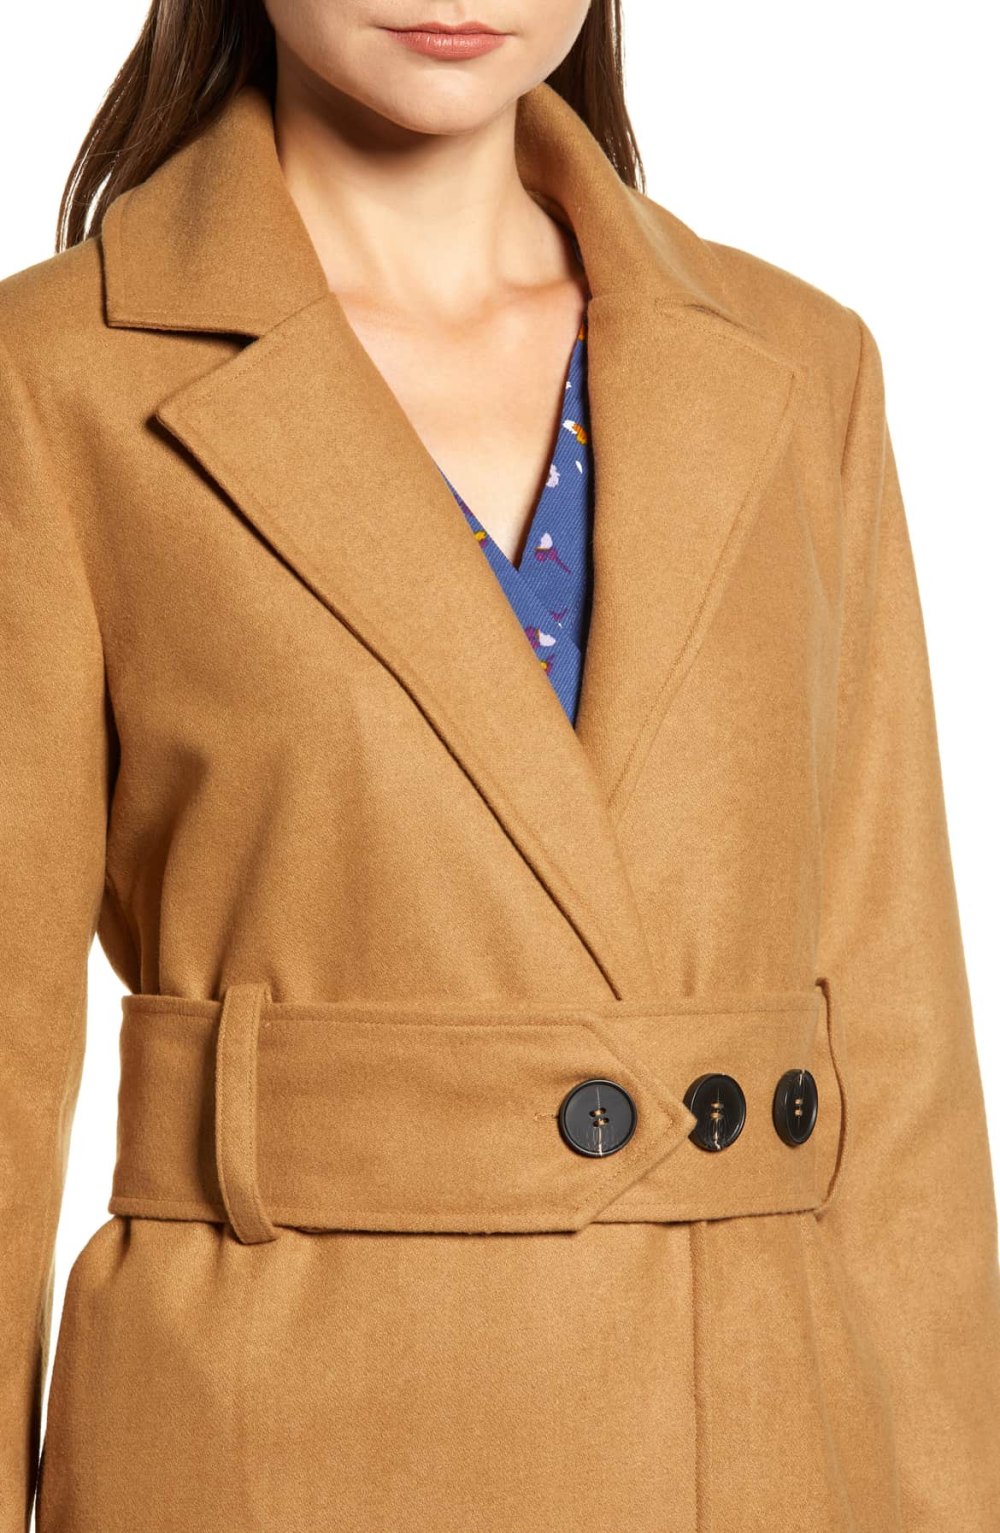 close up chriselle lim trench coat victoria